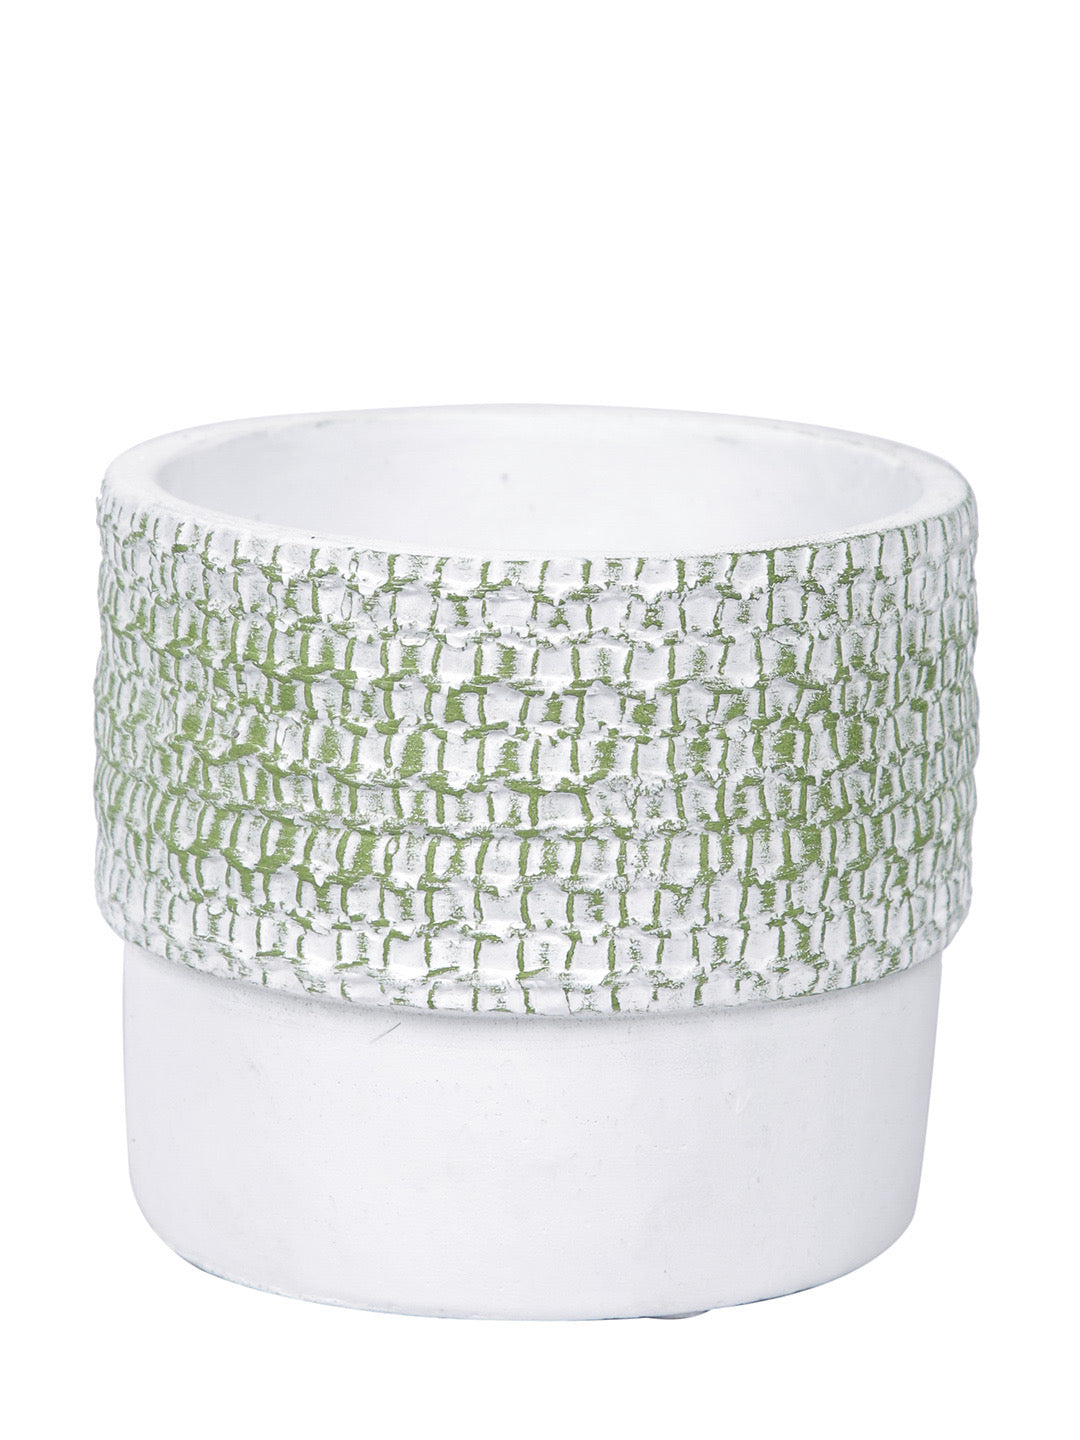 Set of 3 Planter with Textured effects - Default Title (CHC22329_3)